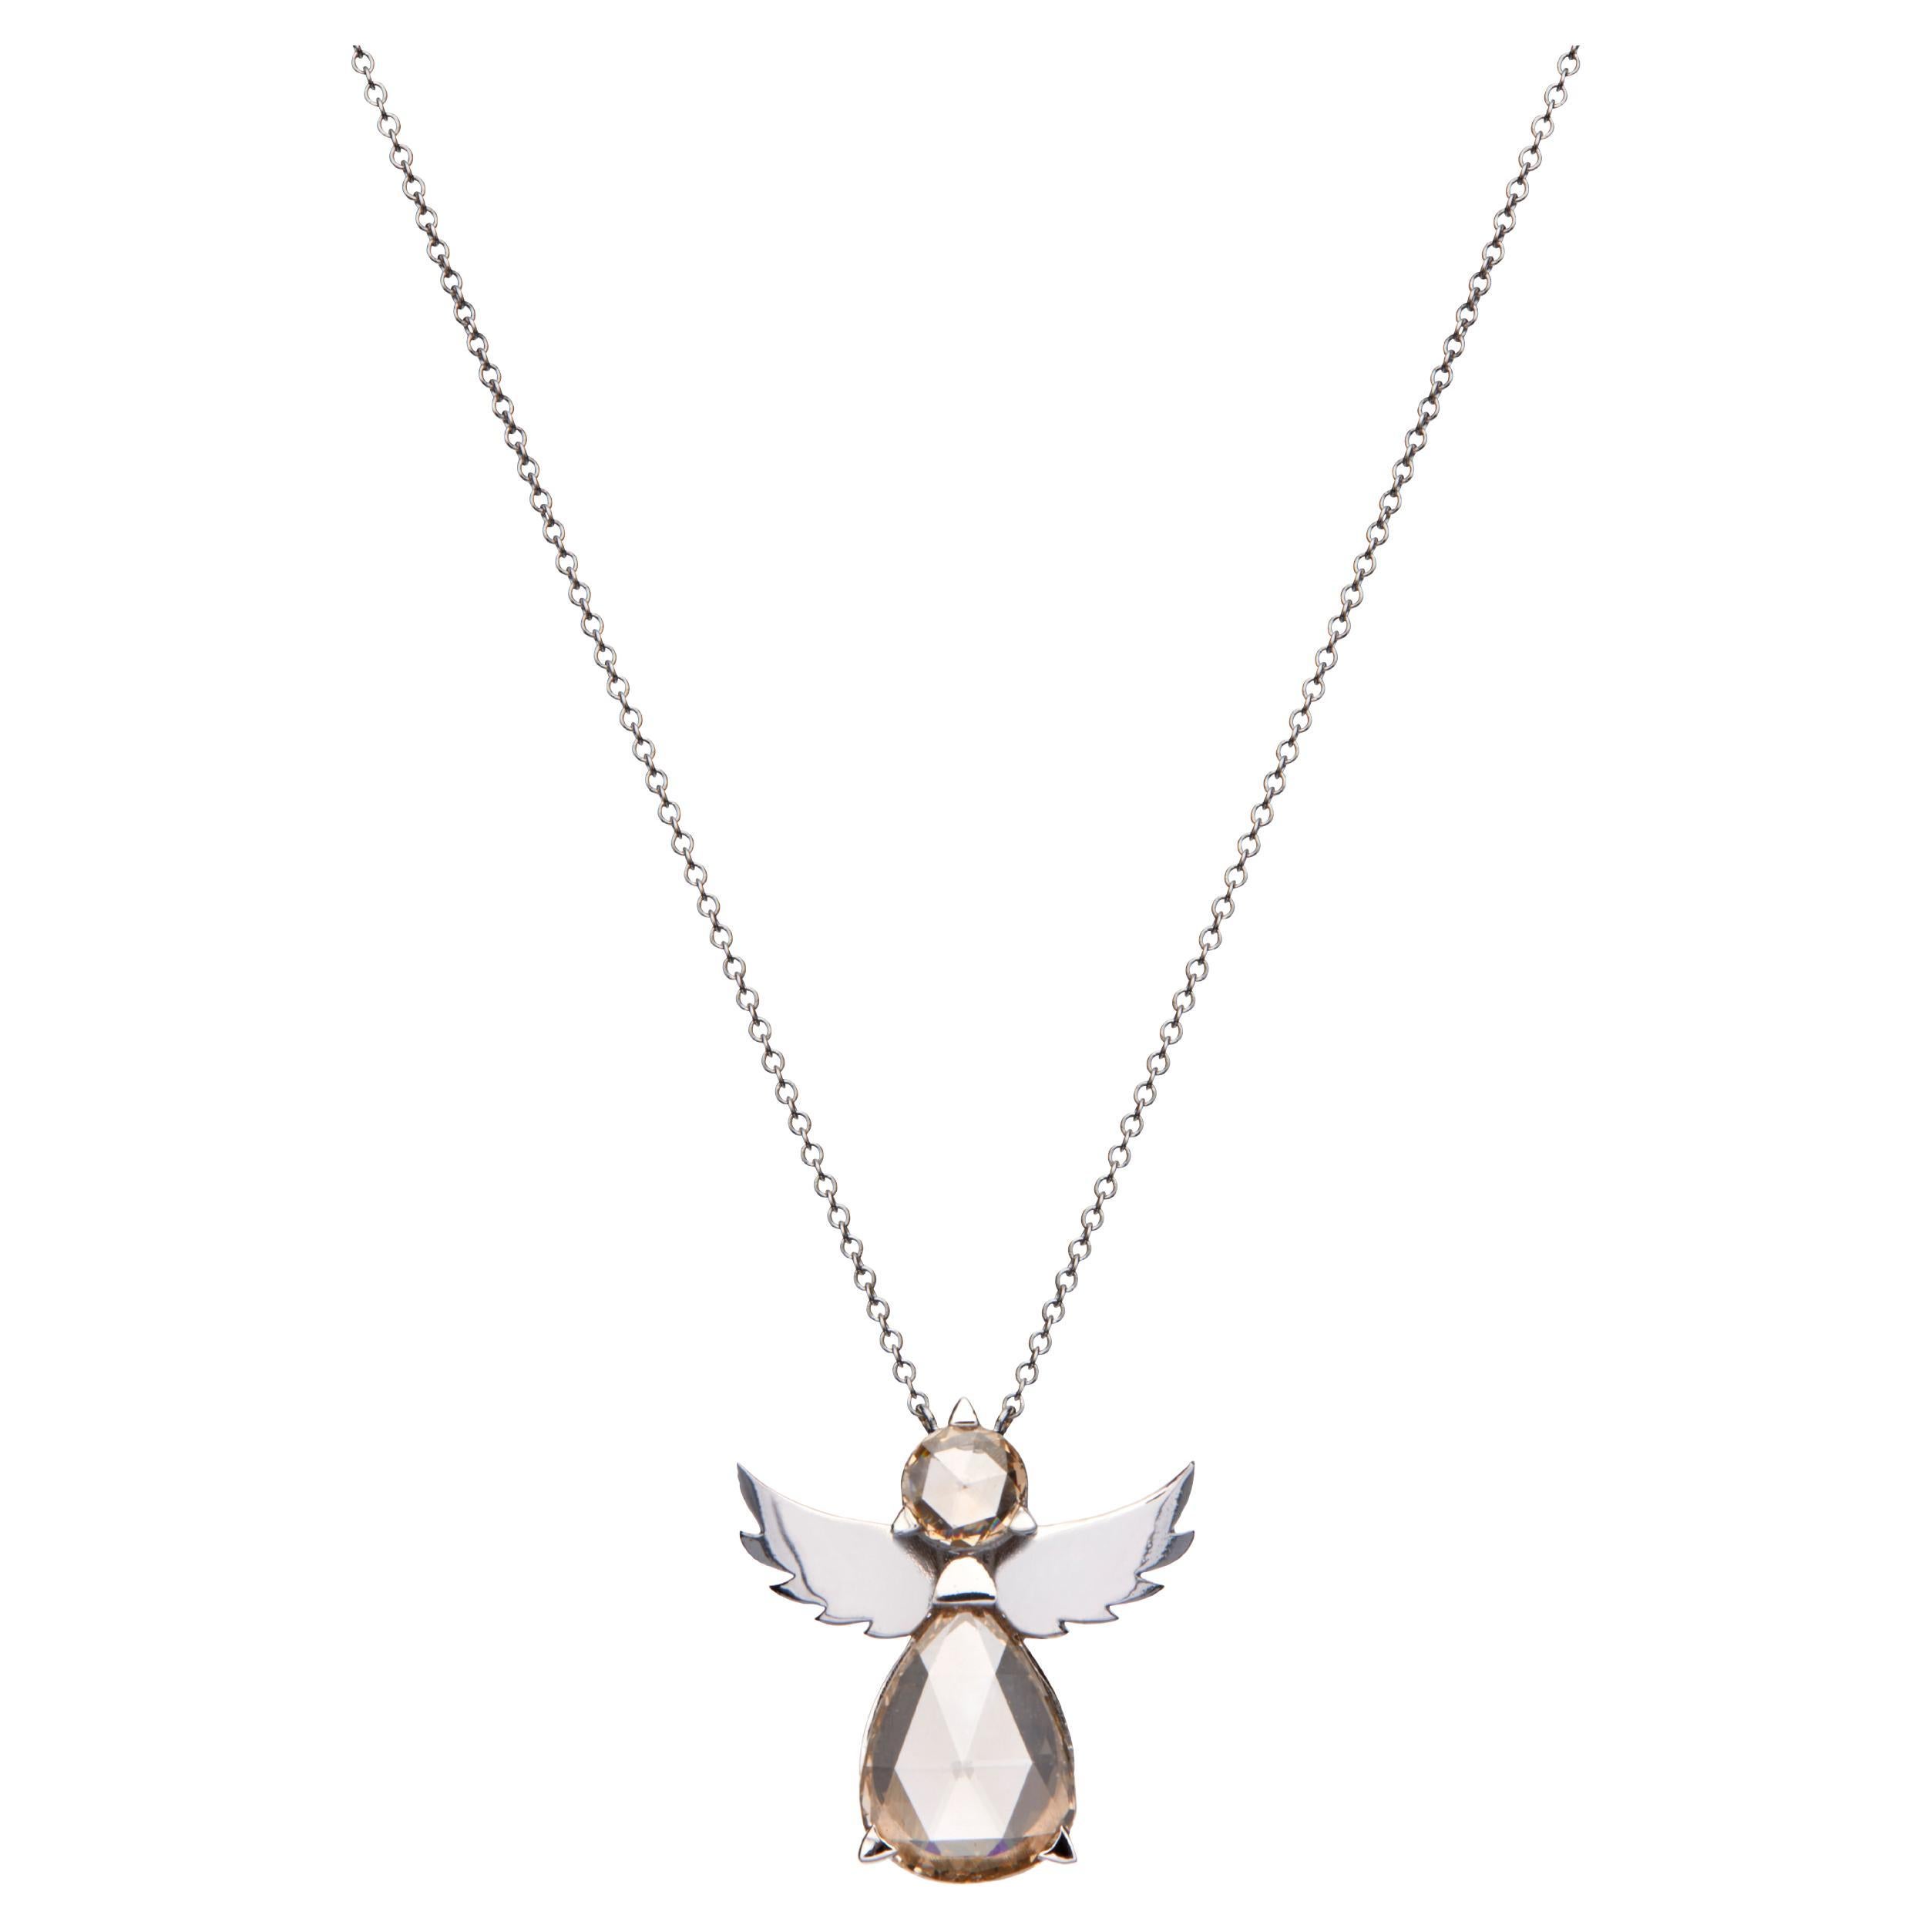 Details about   Guardian Angel Necklace white gold wings pendant angel wings 